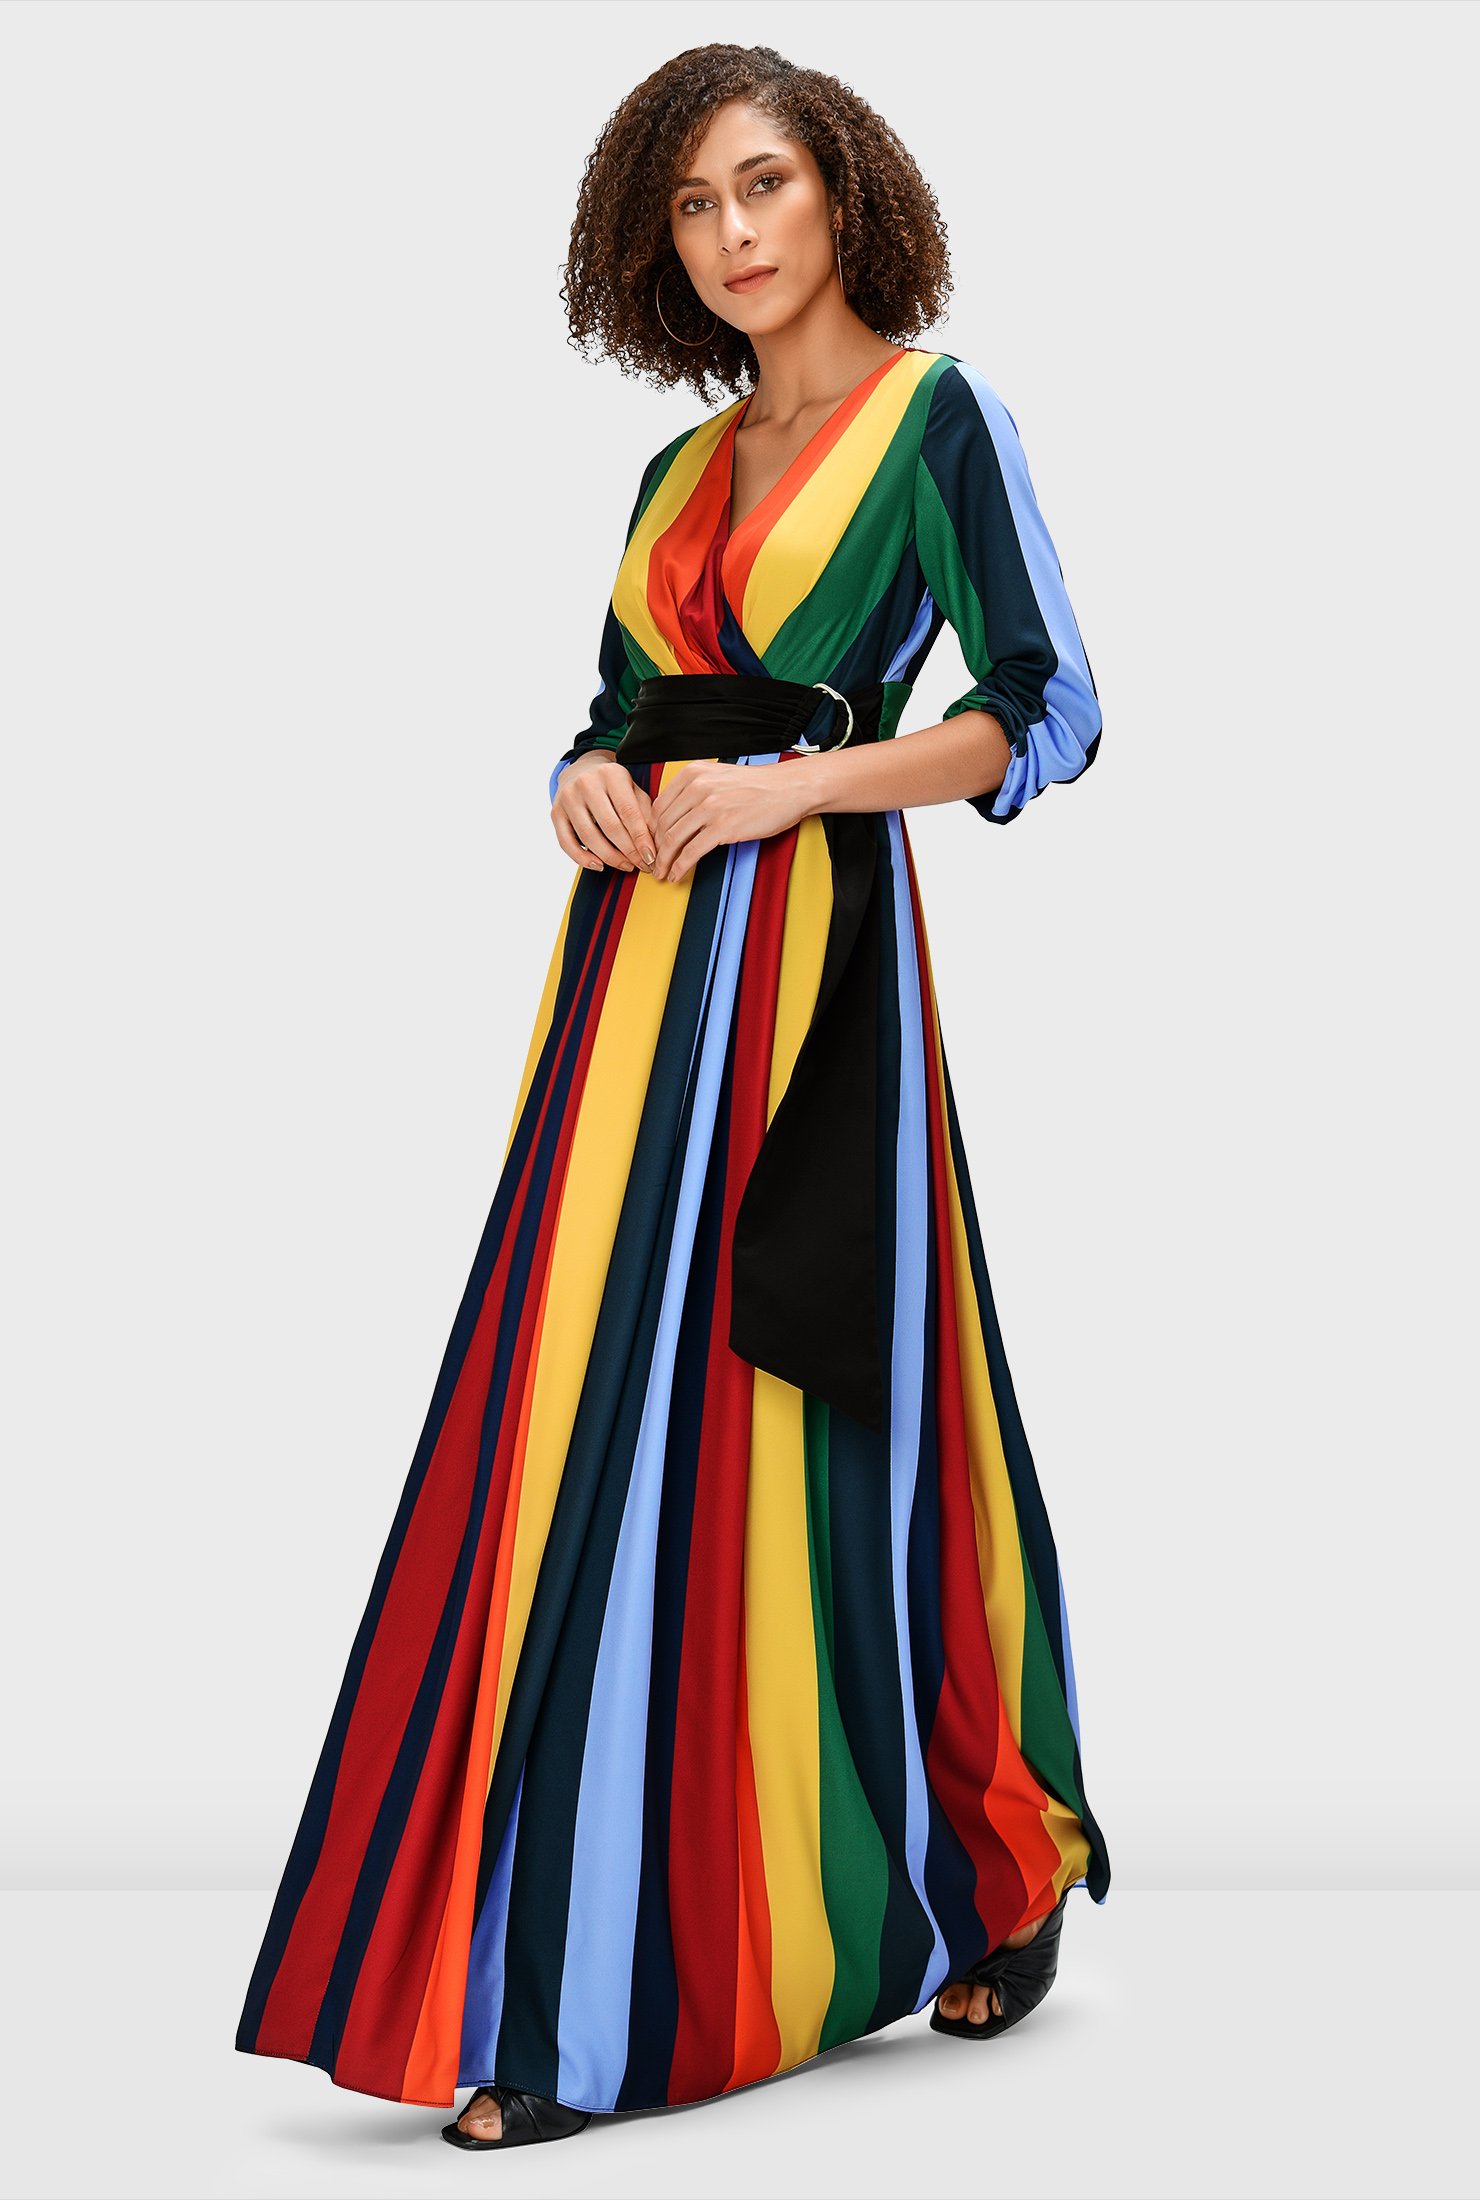 Multi-color stripe print in linear lines adds a slimming effect to our breezy crepe maxi dress detailed with a pleated surplice bodice and strategic ruching to ensure a flattering fit.